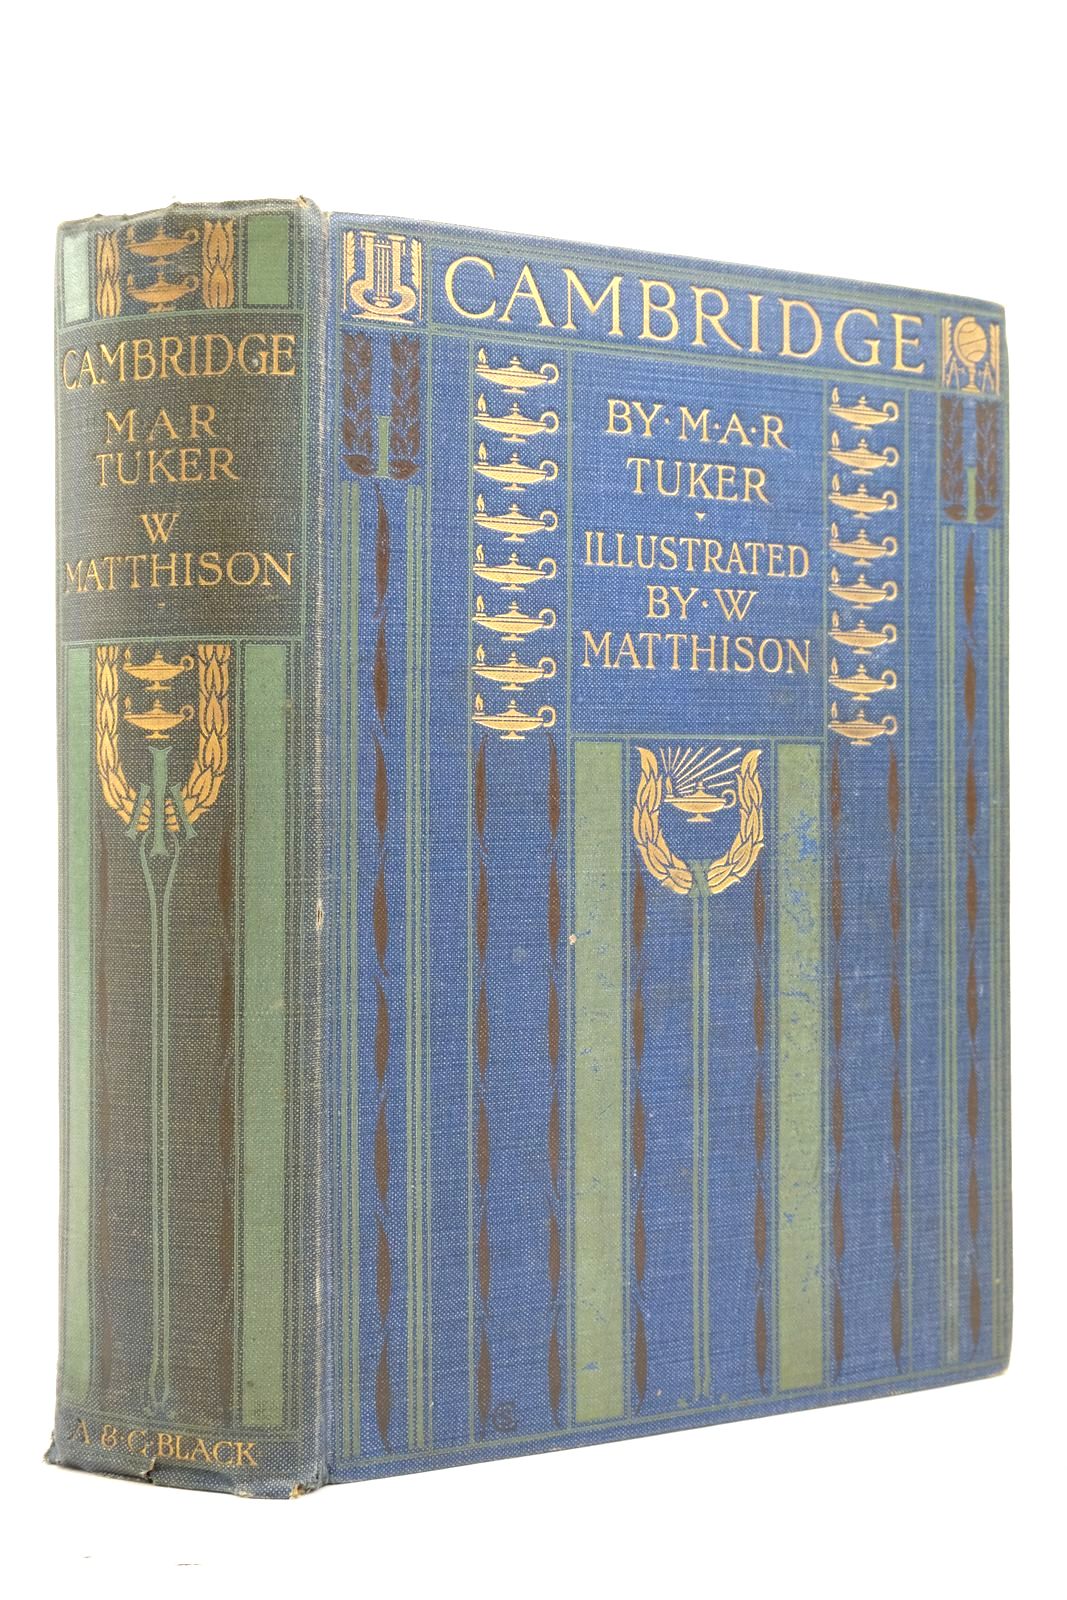 Photo of CAMBRIDGE written by Tuker, M.A.R. illustrated by Matthison, W. published by Adam &amp; Charles Black (STOCK CODE: 2137538)  for sale by Stella & Rose's Books